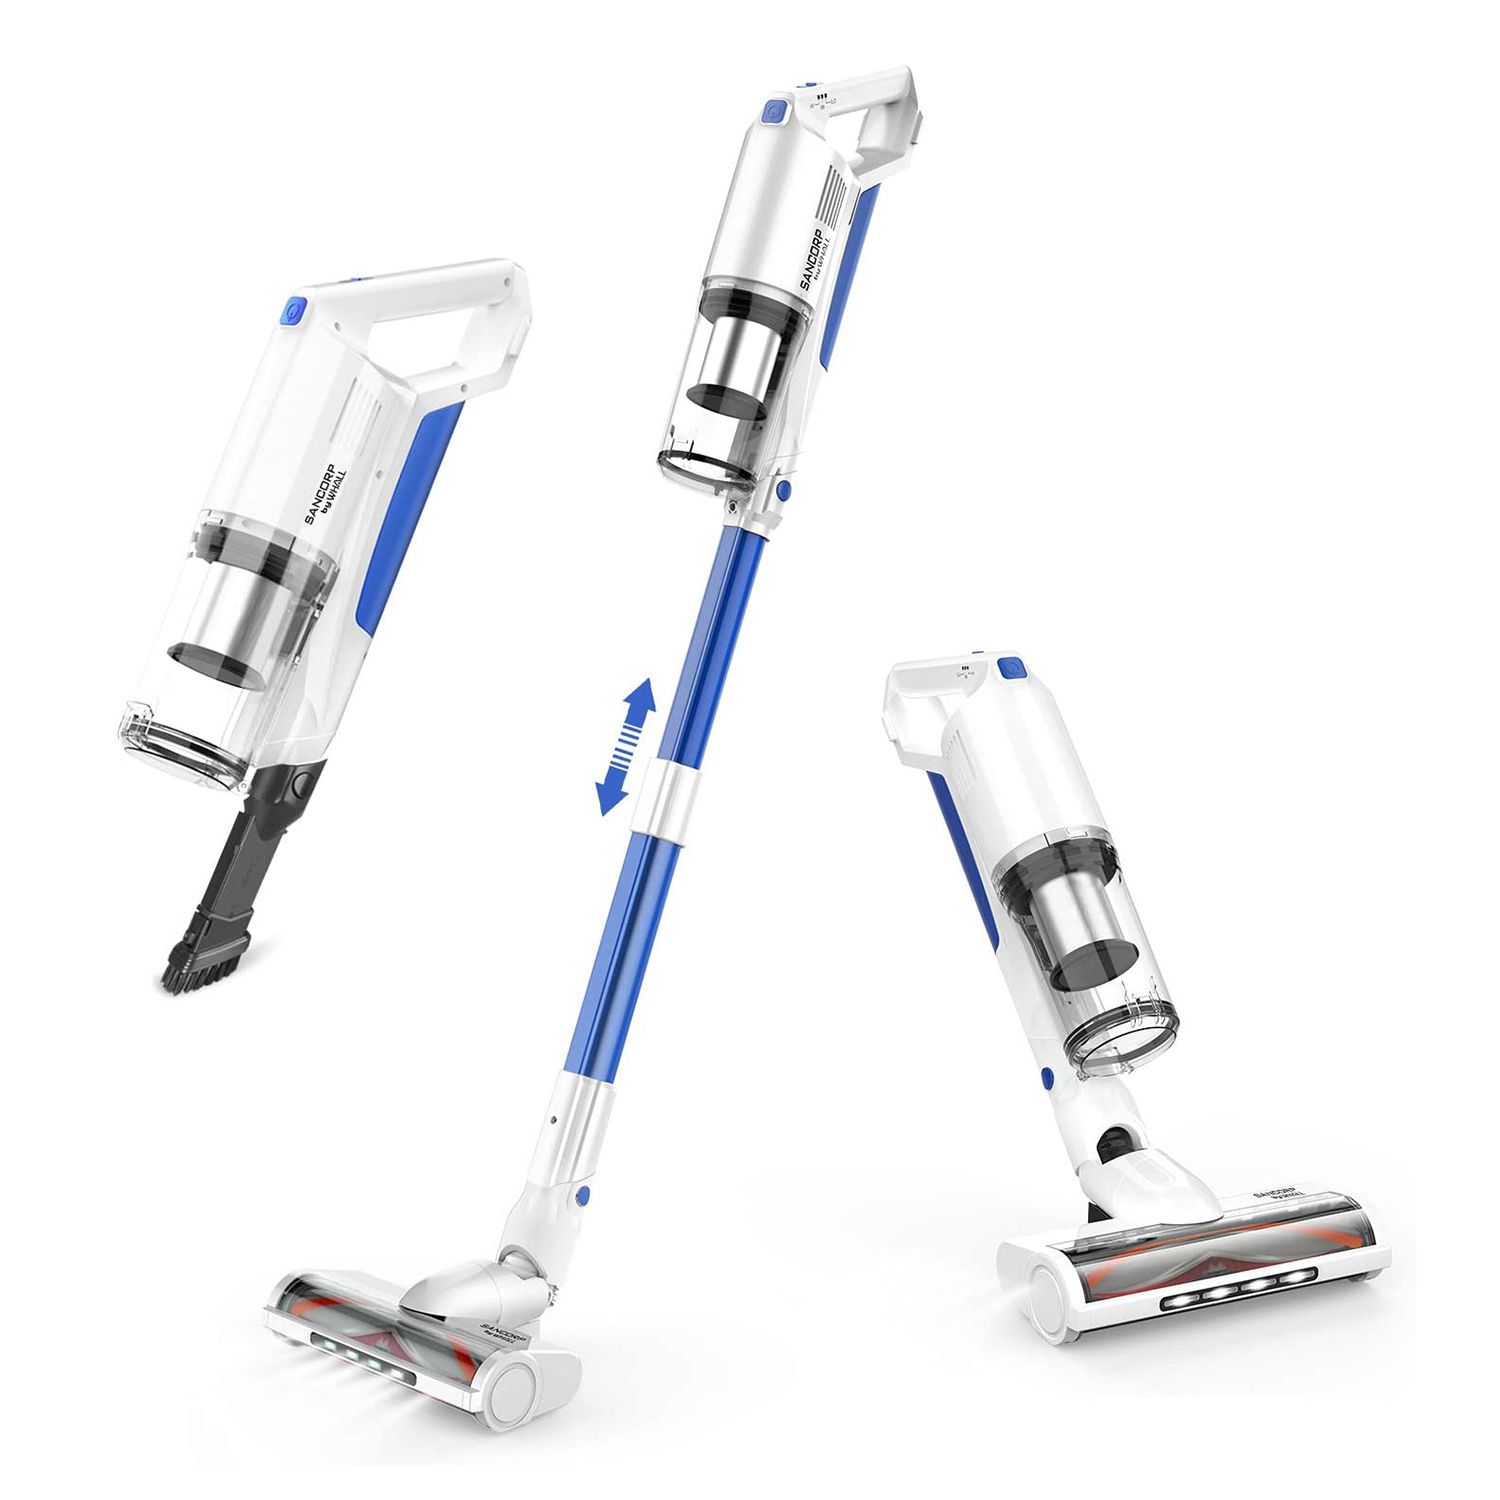 Whall Cordless Vacuum Cleaner